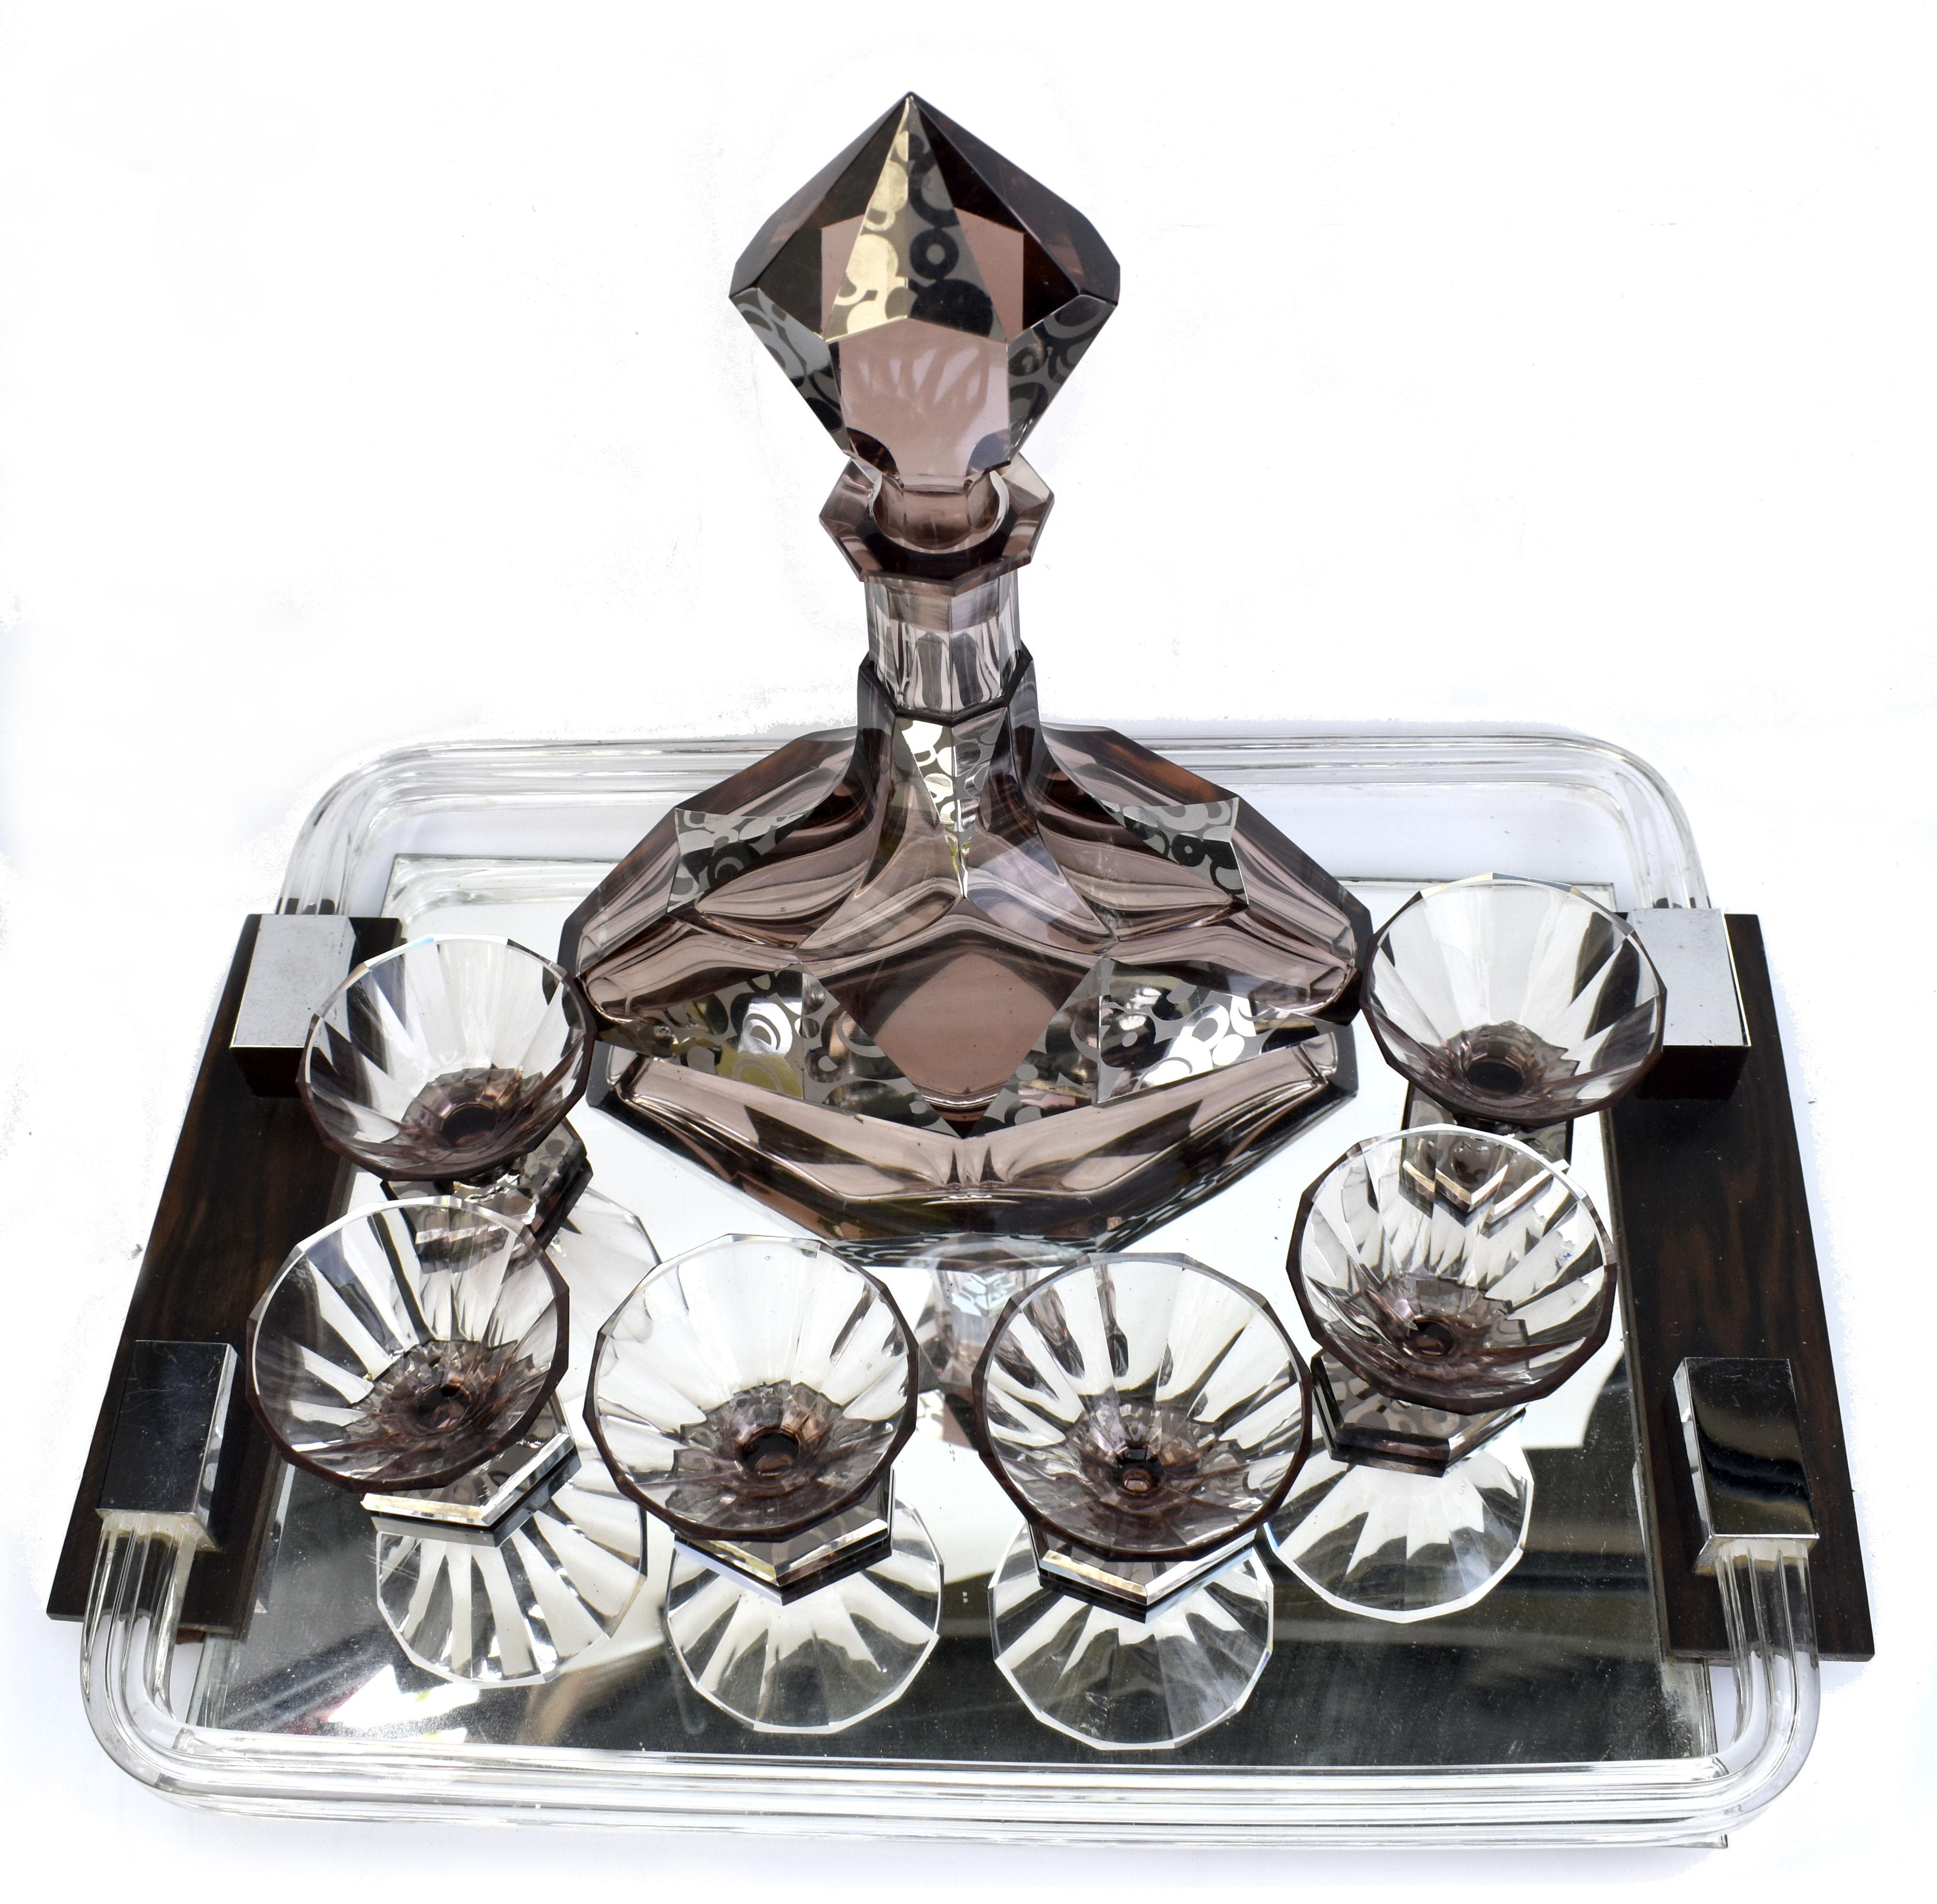 Very high quality and striking looking 1930's Art Deco Czech glass decanter set. Features a angular shape decanter with stopper and six good sized conical shaped glasses , perfect for modern use. The whole set is in olive green glass which has